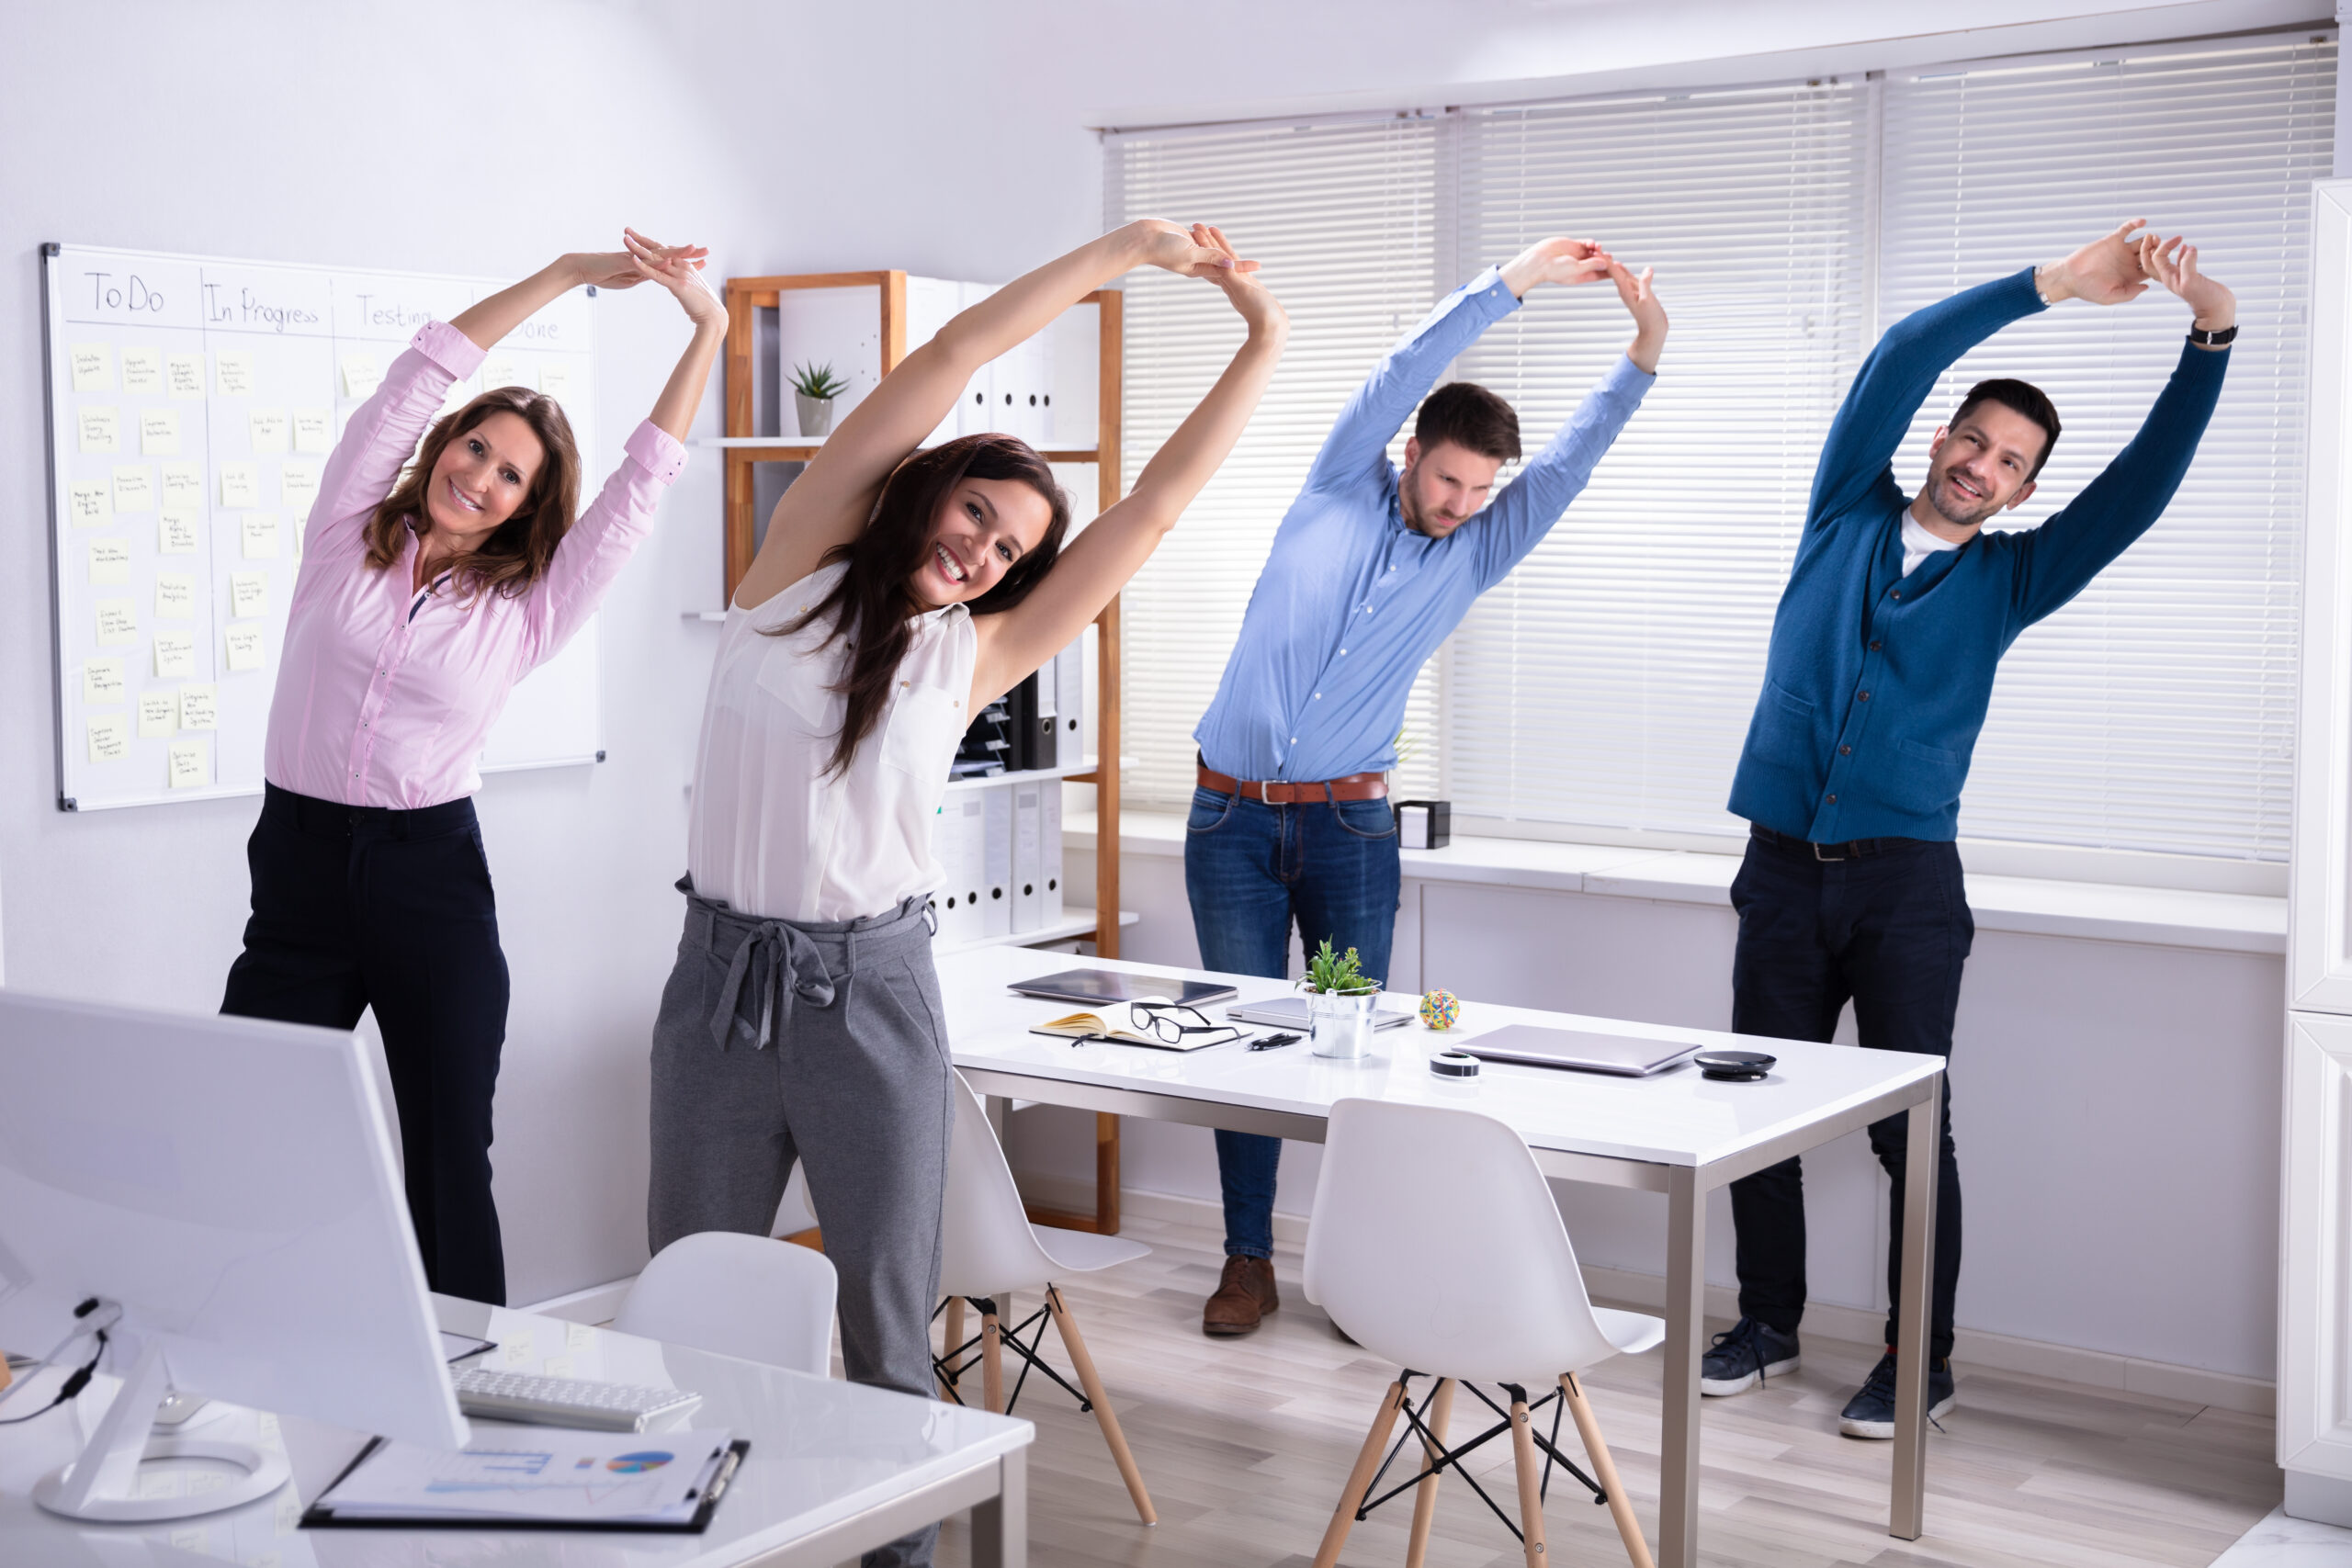 Happy employee Doing Stretching Exercise Behind Desk At Workplace